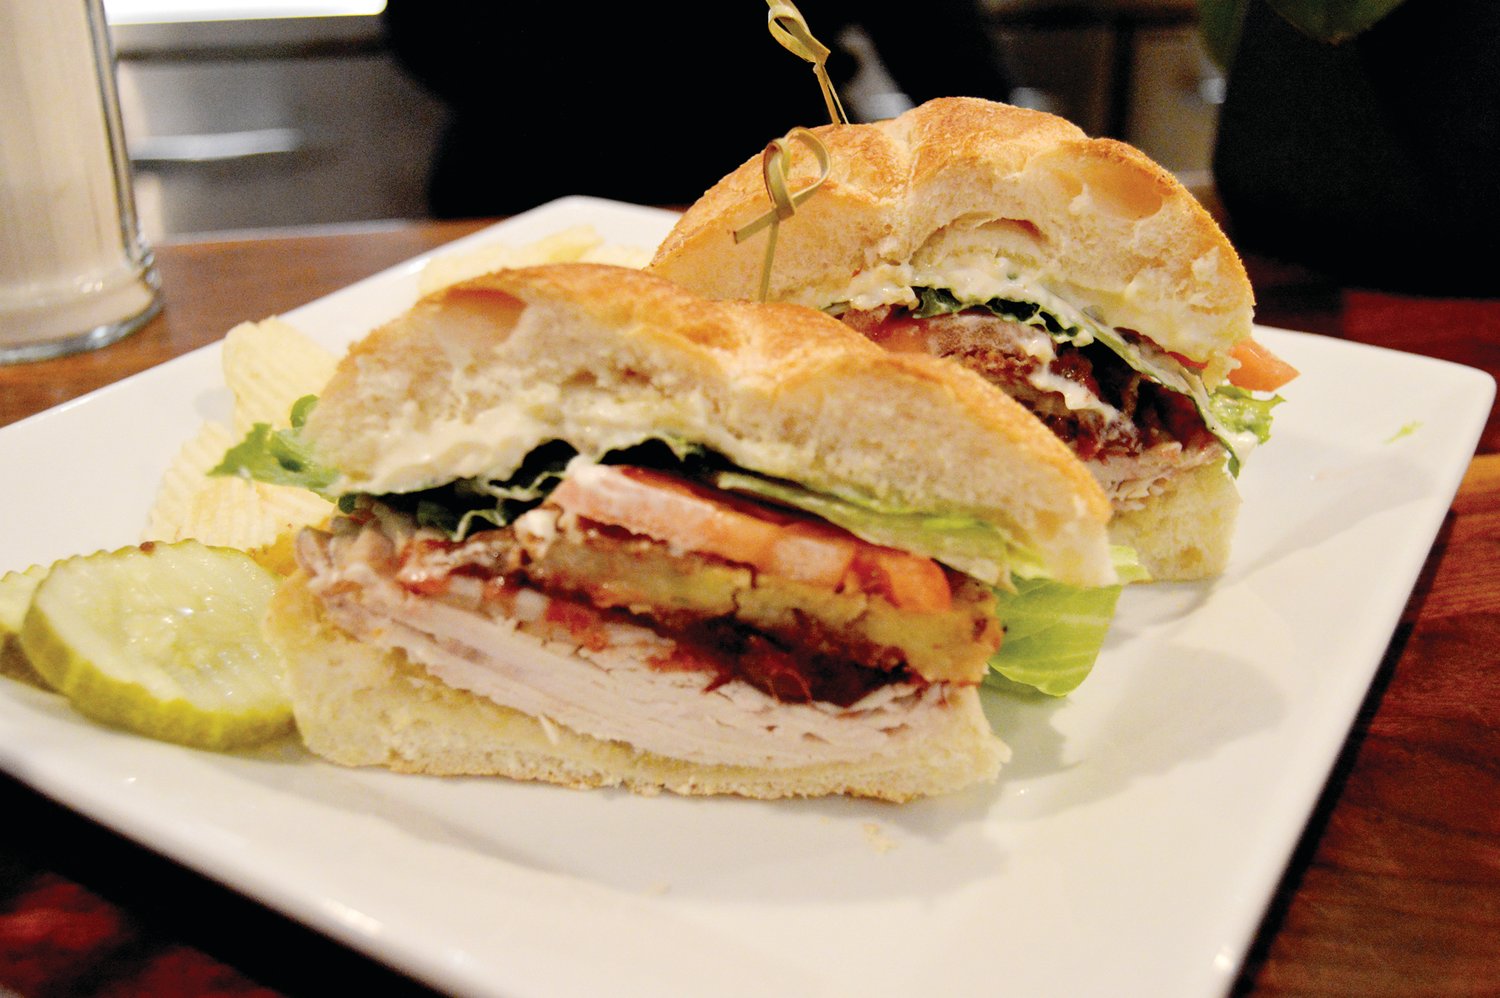 A cranberry turkey sandwich at the Frenchtown Café is served year-round. It includes roast turkey, cranberry sauce and a slice of stuffing. Photograph by Susan S. Yeske.